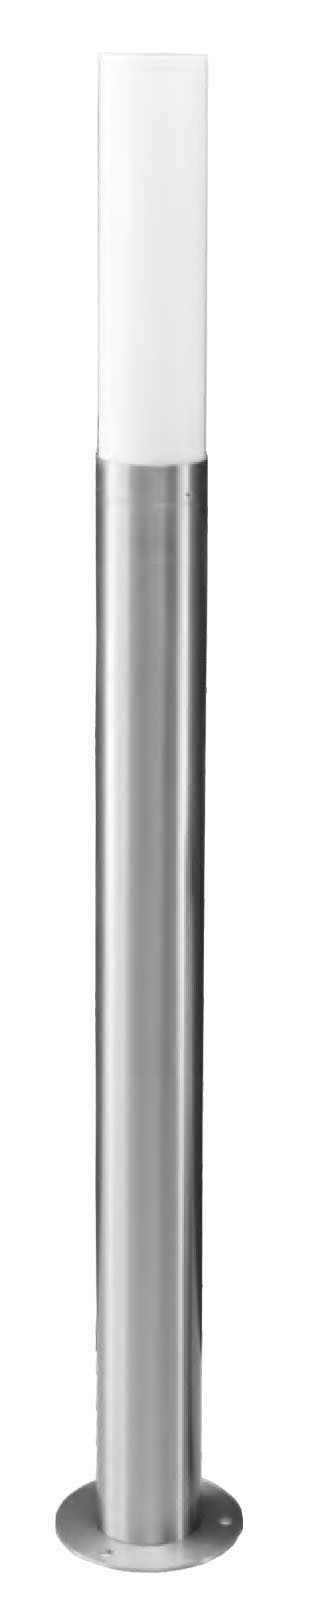 Lawn lamp bollard light WD-C035 | cylinder concise style | PMMA diffuser | COB LED 5W 10W 15W | CFL E27 11W 13W 16W | D85mm*H1200mm | Resistant to corrosion acid alkali | Suitable for gardens parks pathways and more